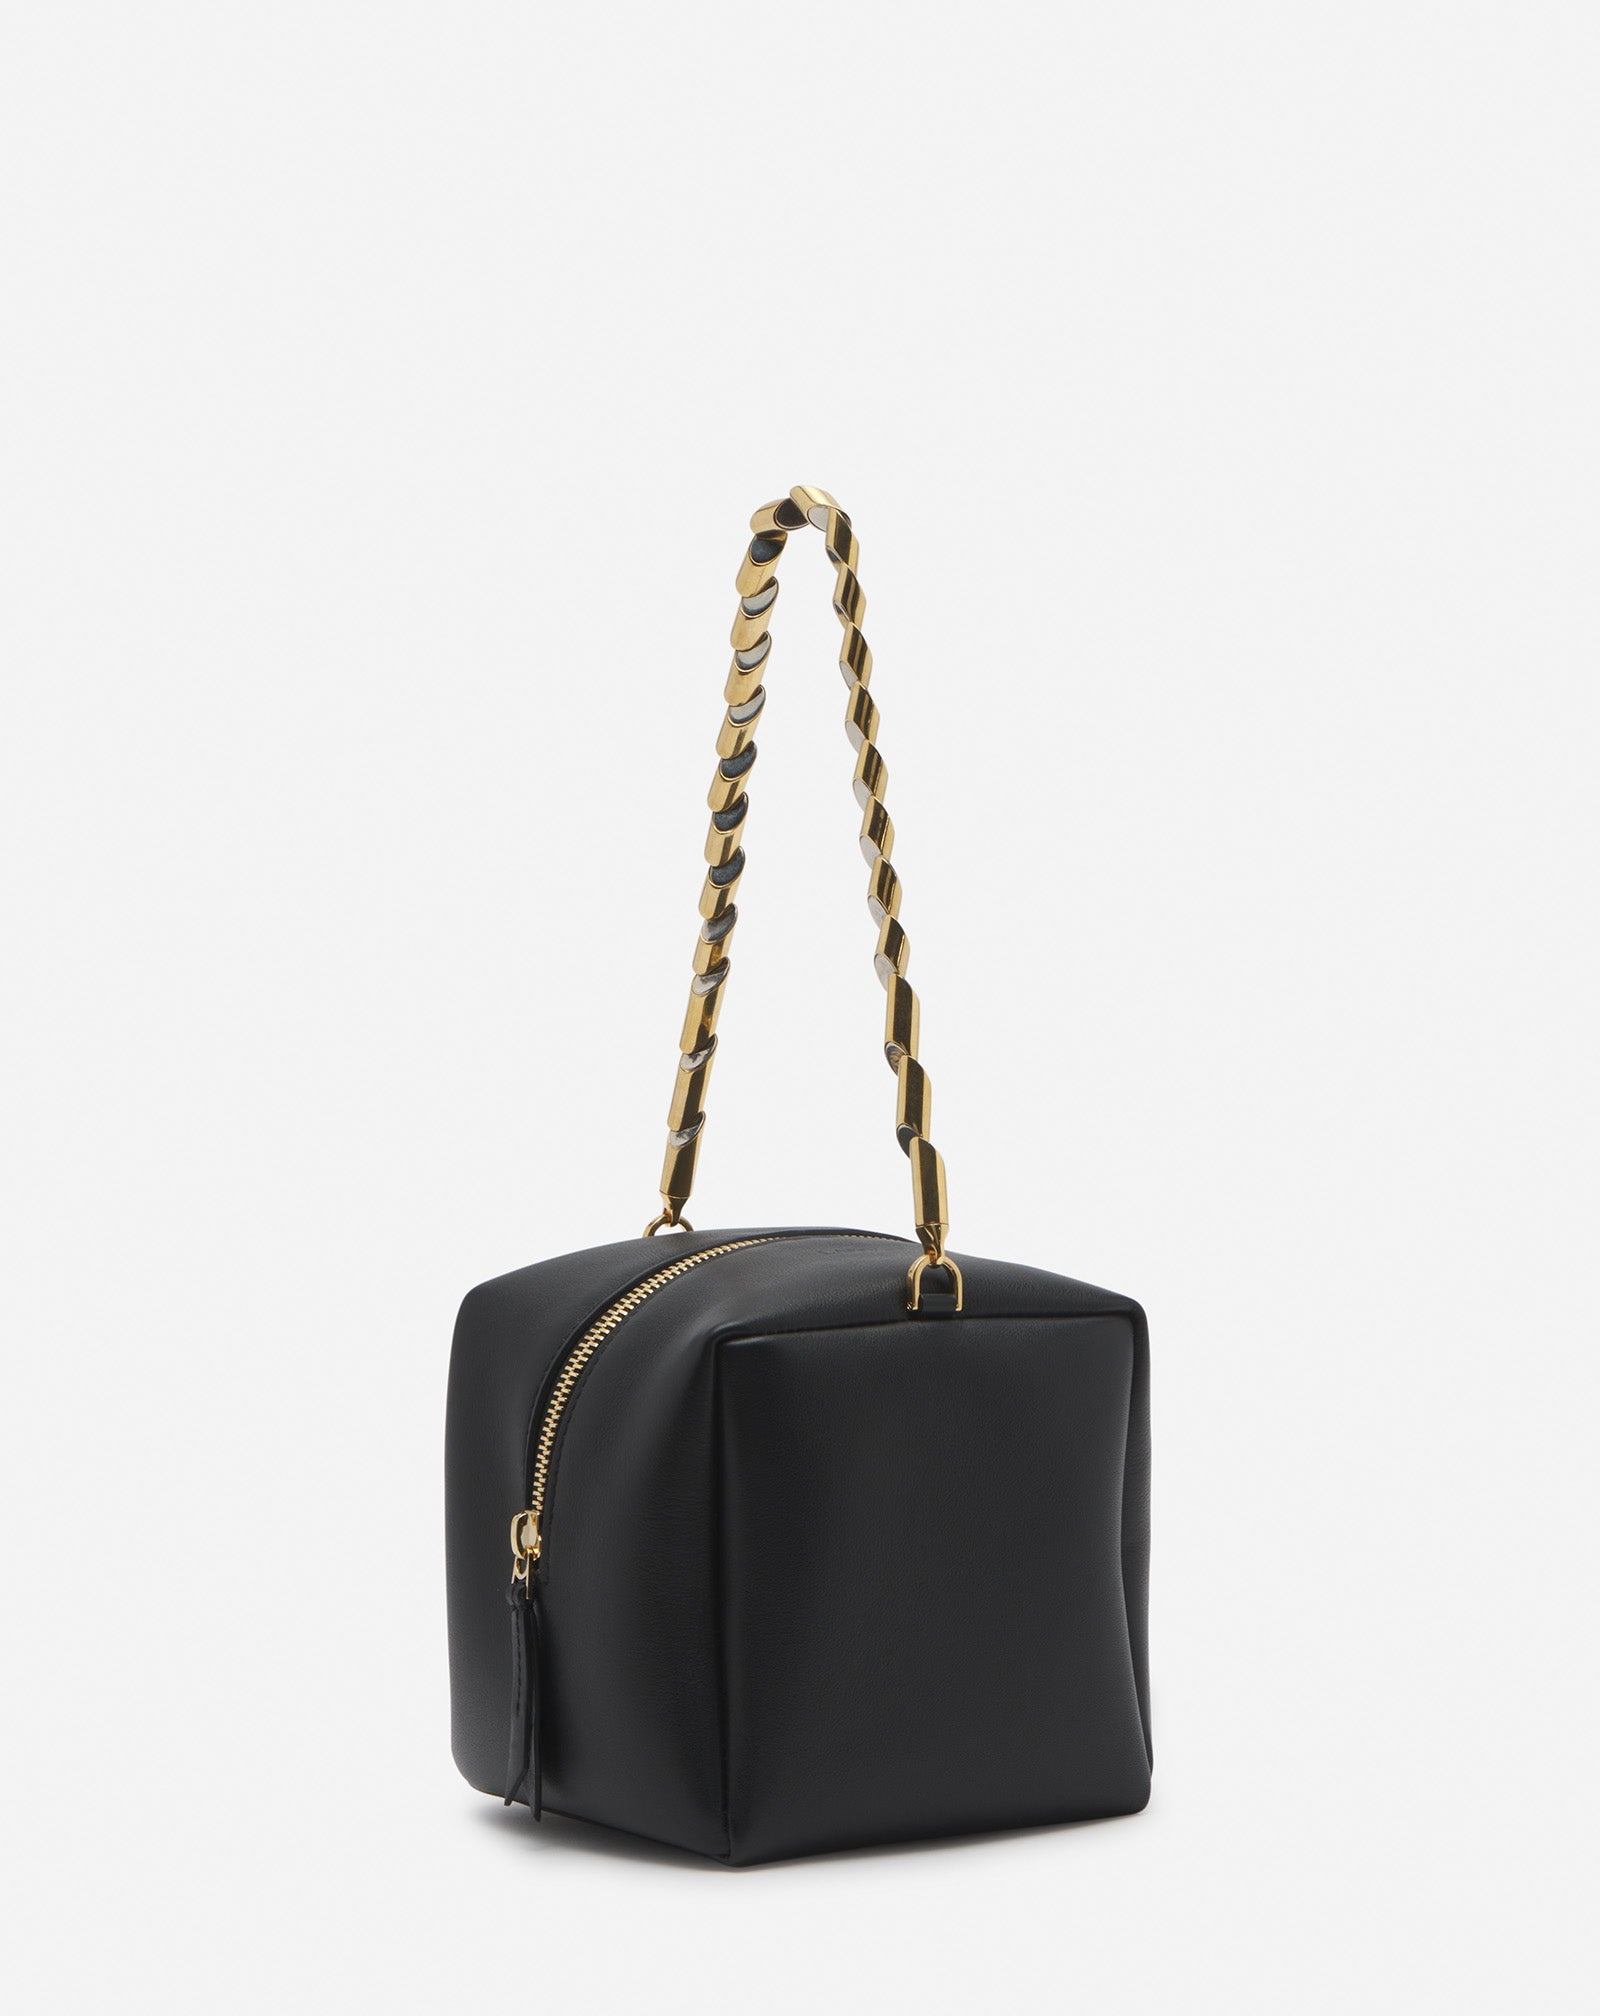 TEMPO BY LANVIN LEATHER BAG WITH SEQUENCE BY LANVIN CHAIN - 2